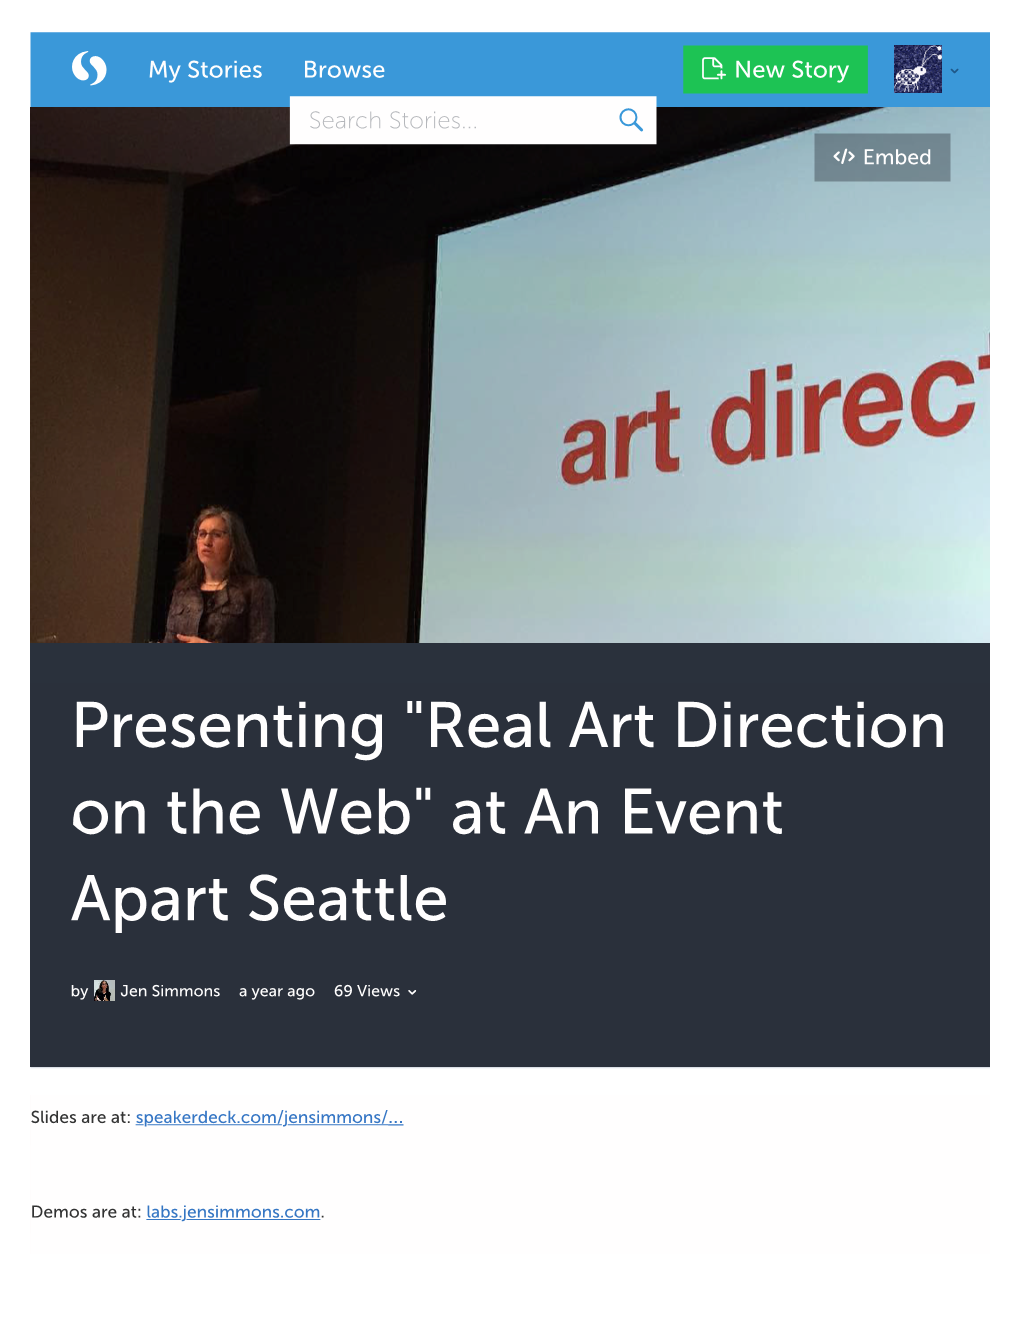 Real Art Direction on the Web" at an Event Apart Seattle